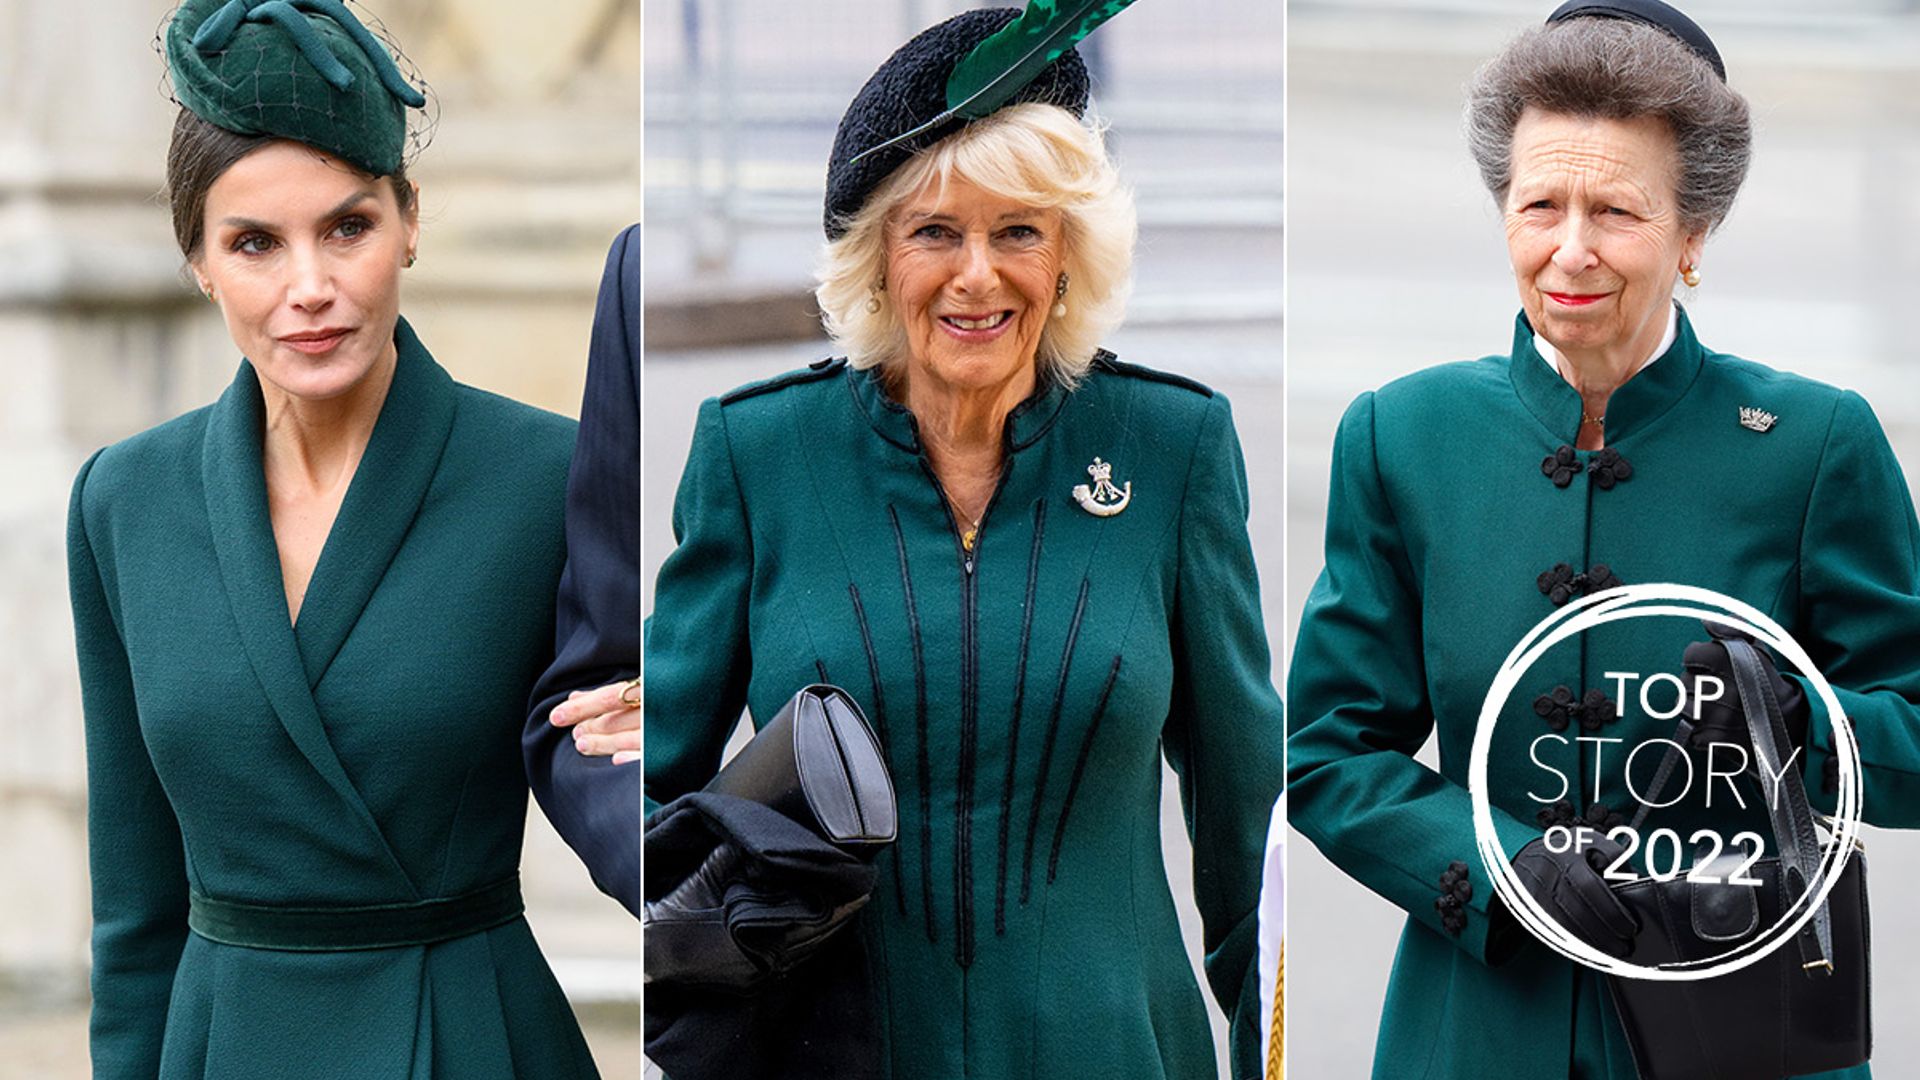 royals wearing green prince philip service